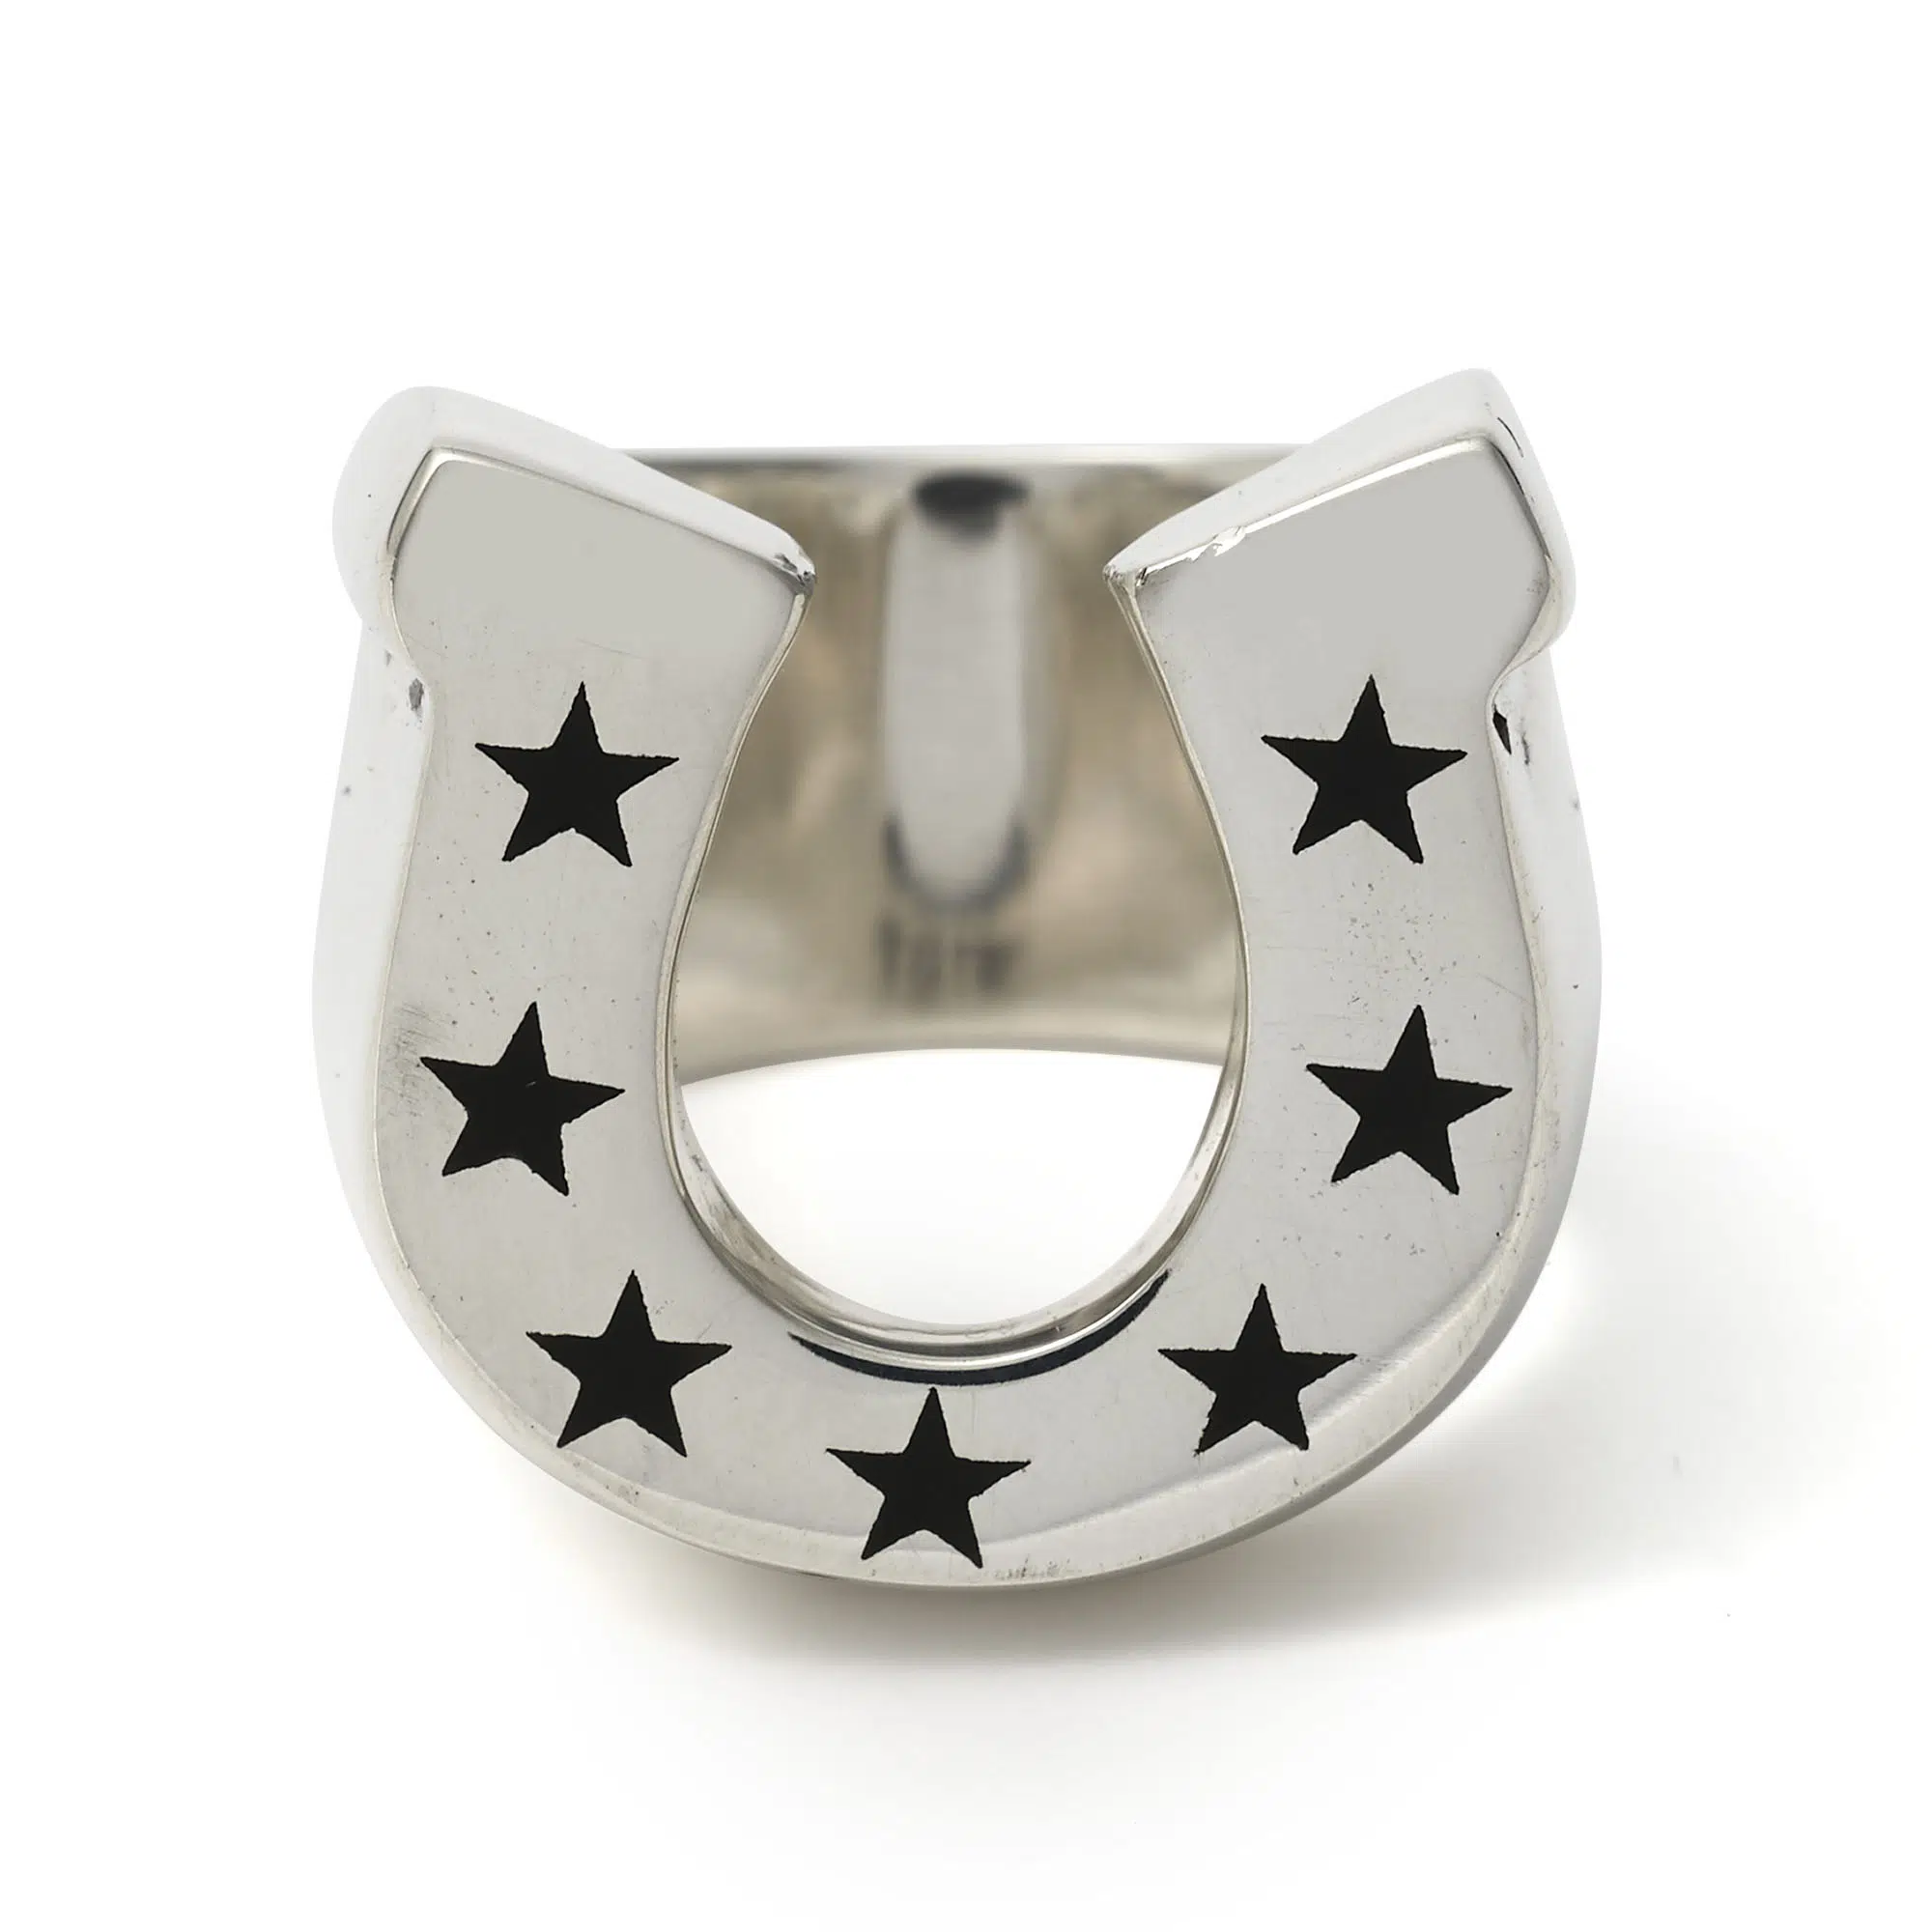 Horseshoe with Stars Ring - The Great Frog London - USA